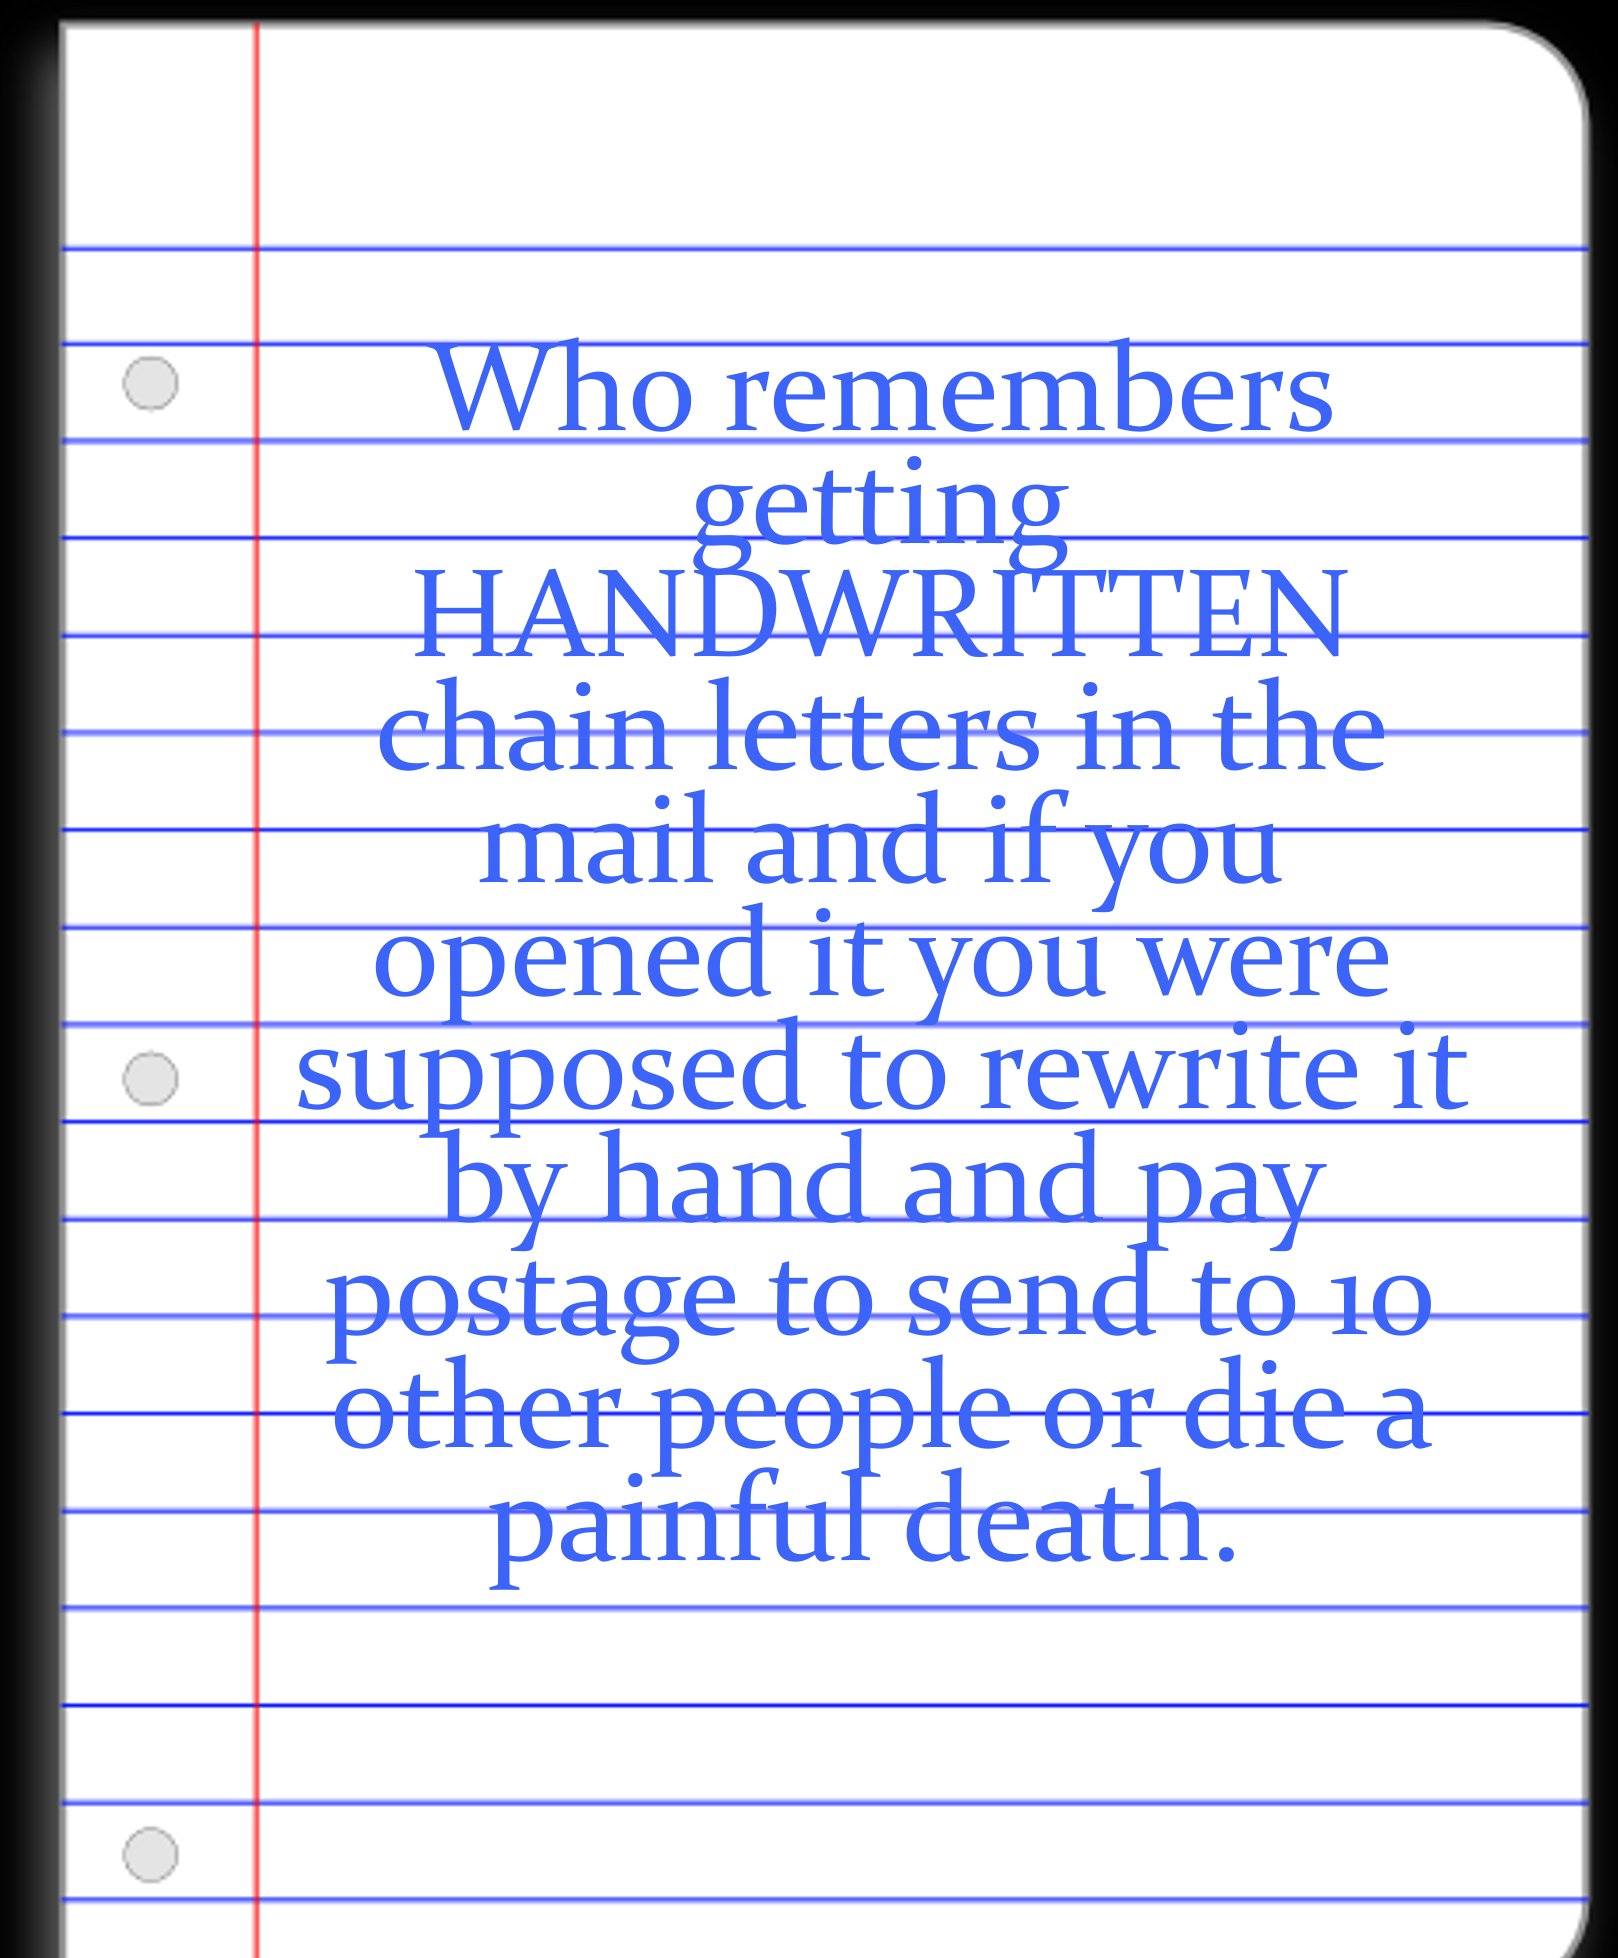 document - Who remembers getting Handwritten chain letters in the mail and if you opened it you were supposed to rewrite it by hand and pay postage to send to 10 other people or die a painfuf death.